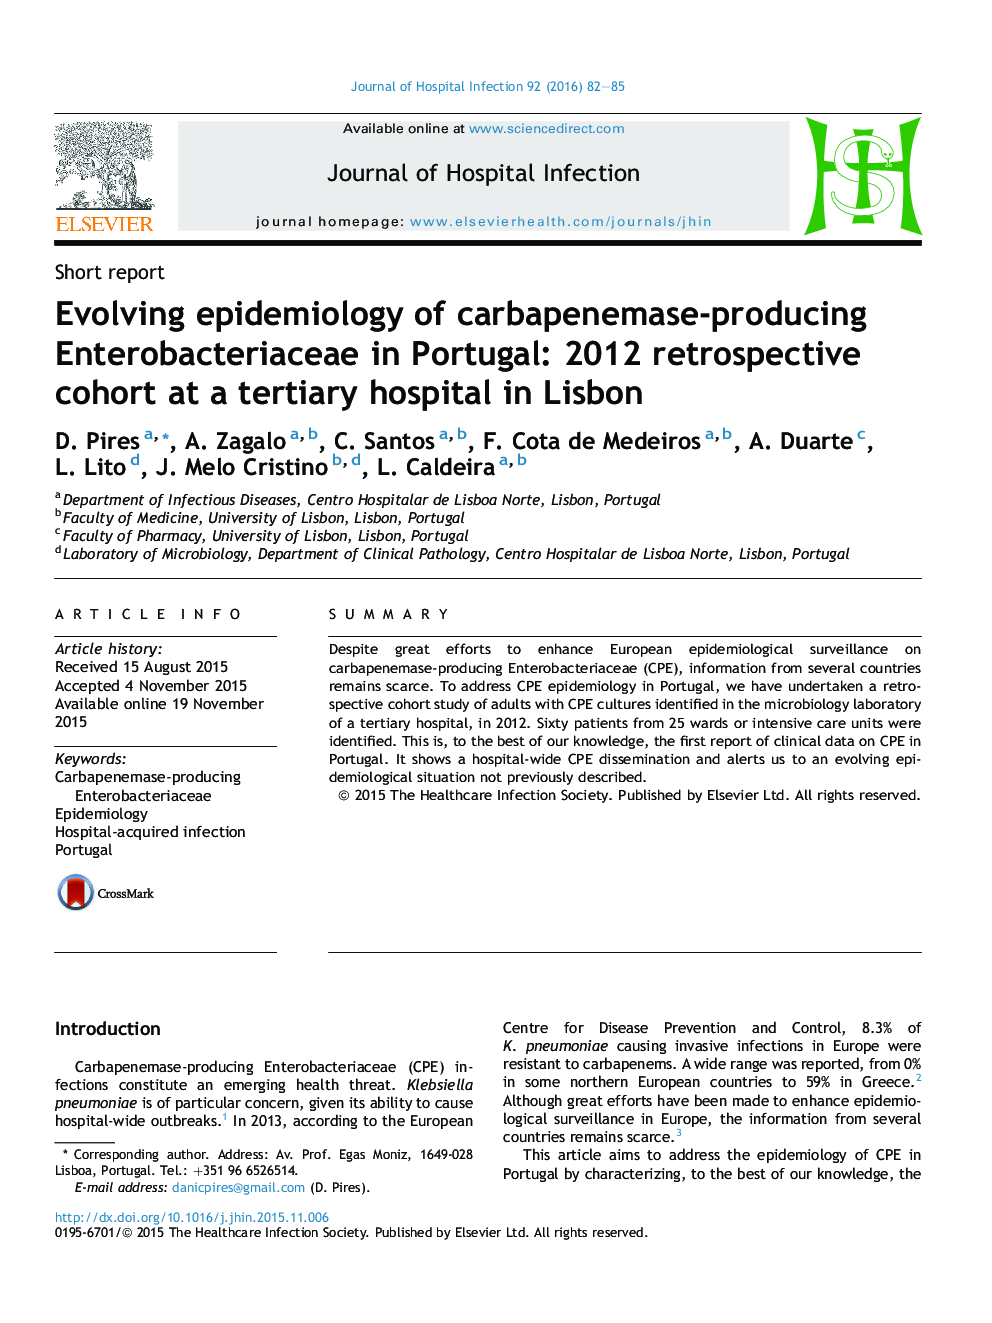 Evolving epidemiology of carbapenemase-producing Enterobacteriaceae in Portugal: 2012 retrospective cohort at a tertiary hospital in Lisbon